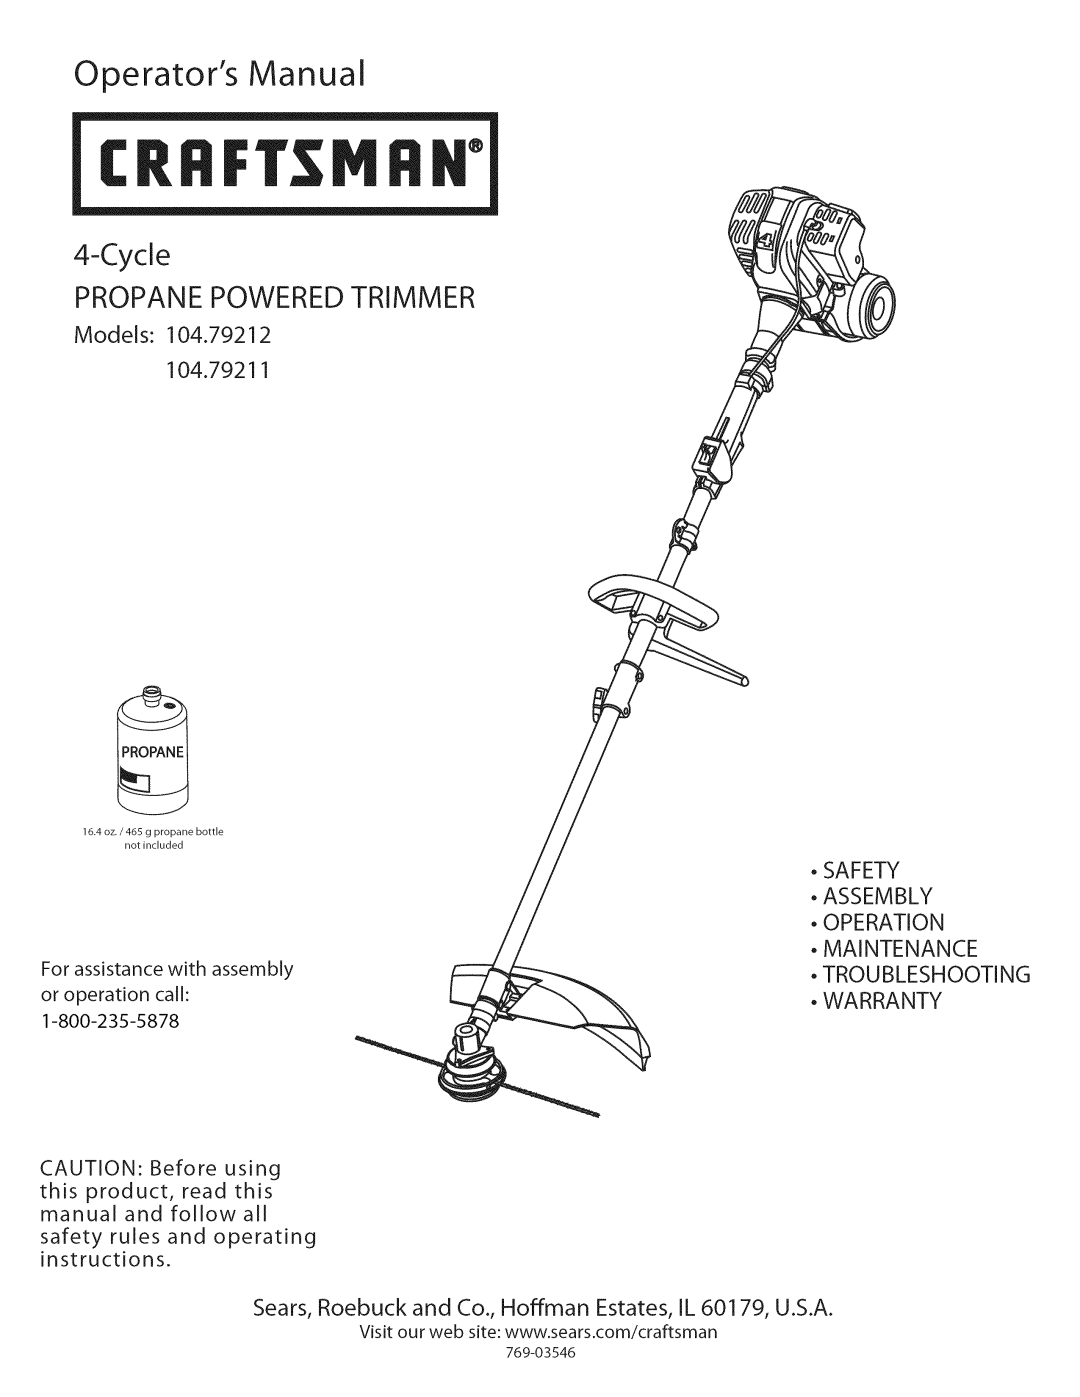 Craftsman 104.79212 warranty Operators Manual, Cycle, Propane Powered Trimmer, Models, 104.79211, Troubleshooting Warranty 